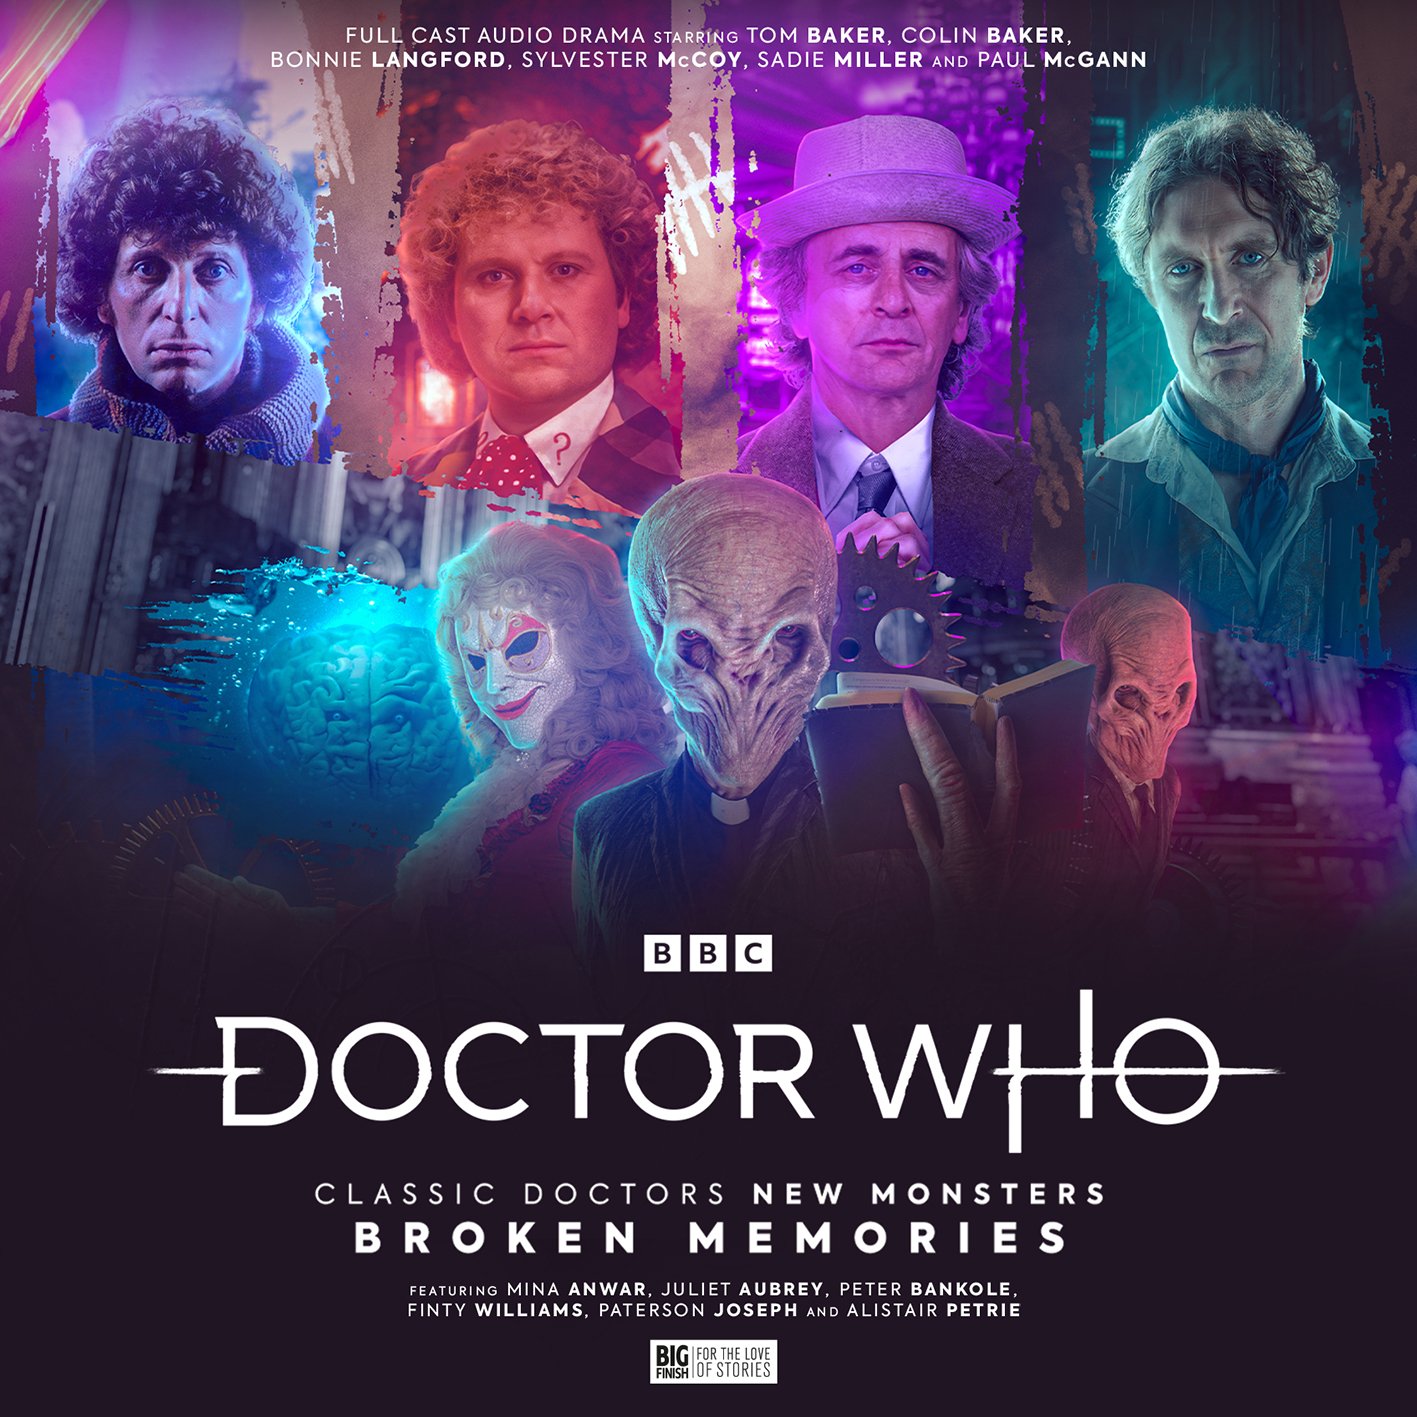 Big Finish Teases Classic Doctors Vs New Monsters, Including the Clockwork Droids and the Silence